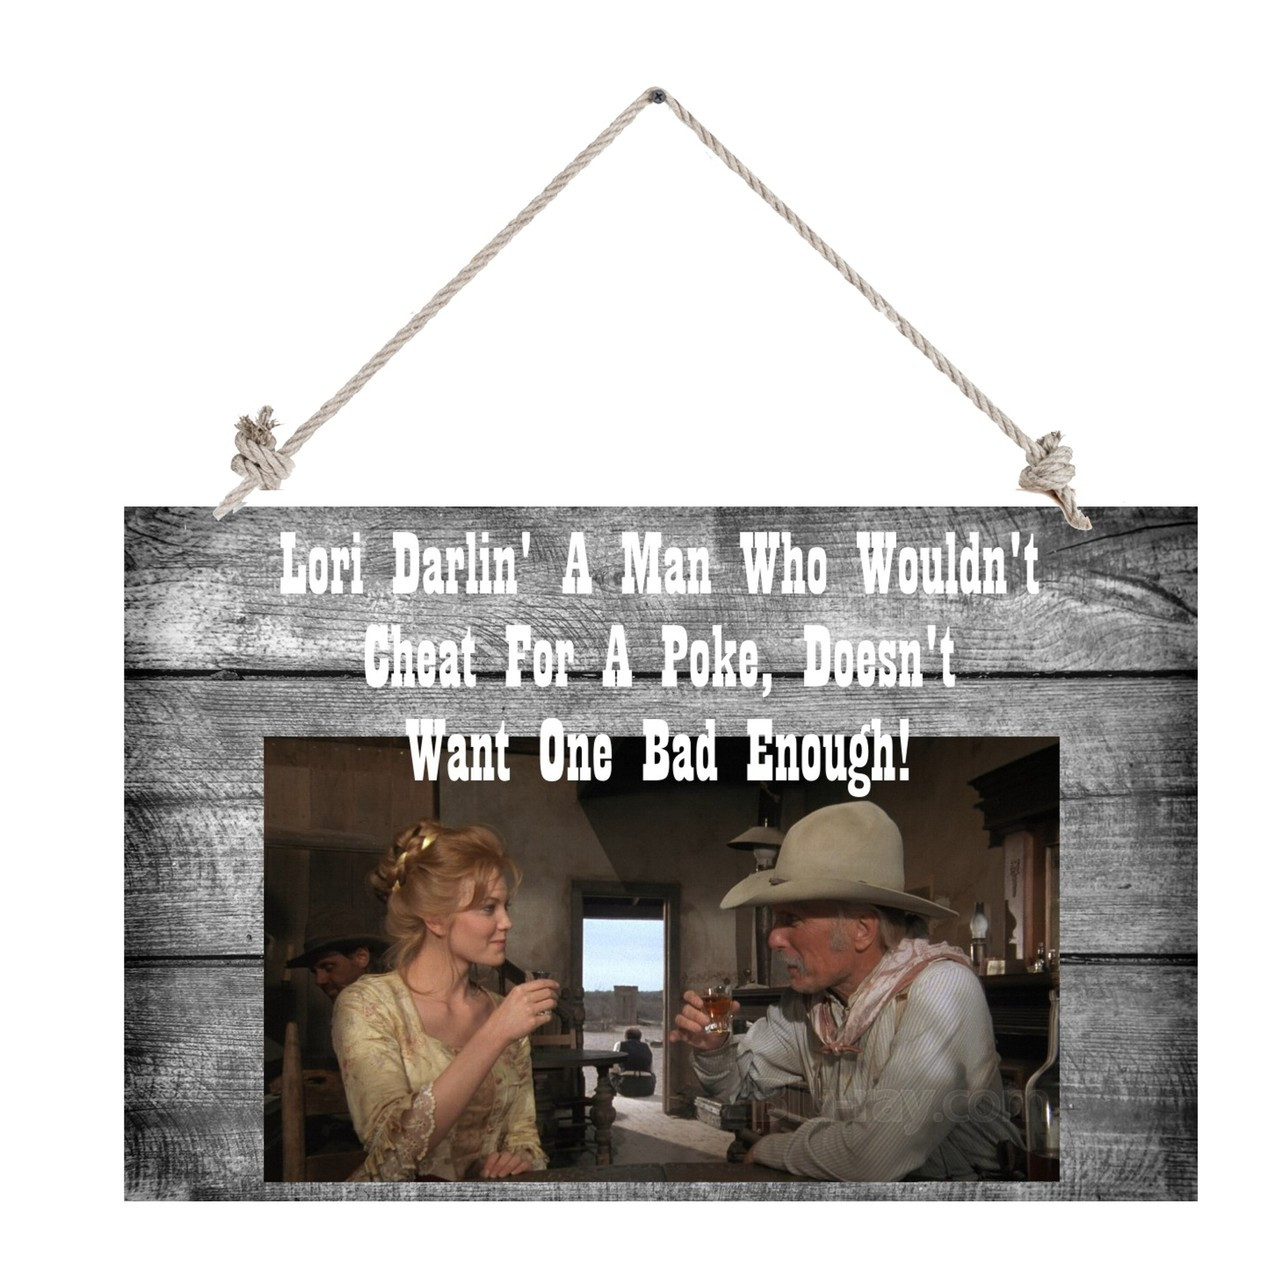 Lonesome Dove A Man Who Wouldn't Cheat For A Doesn't Want One Bad Enough 12" X 18" wood sign